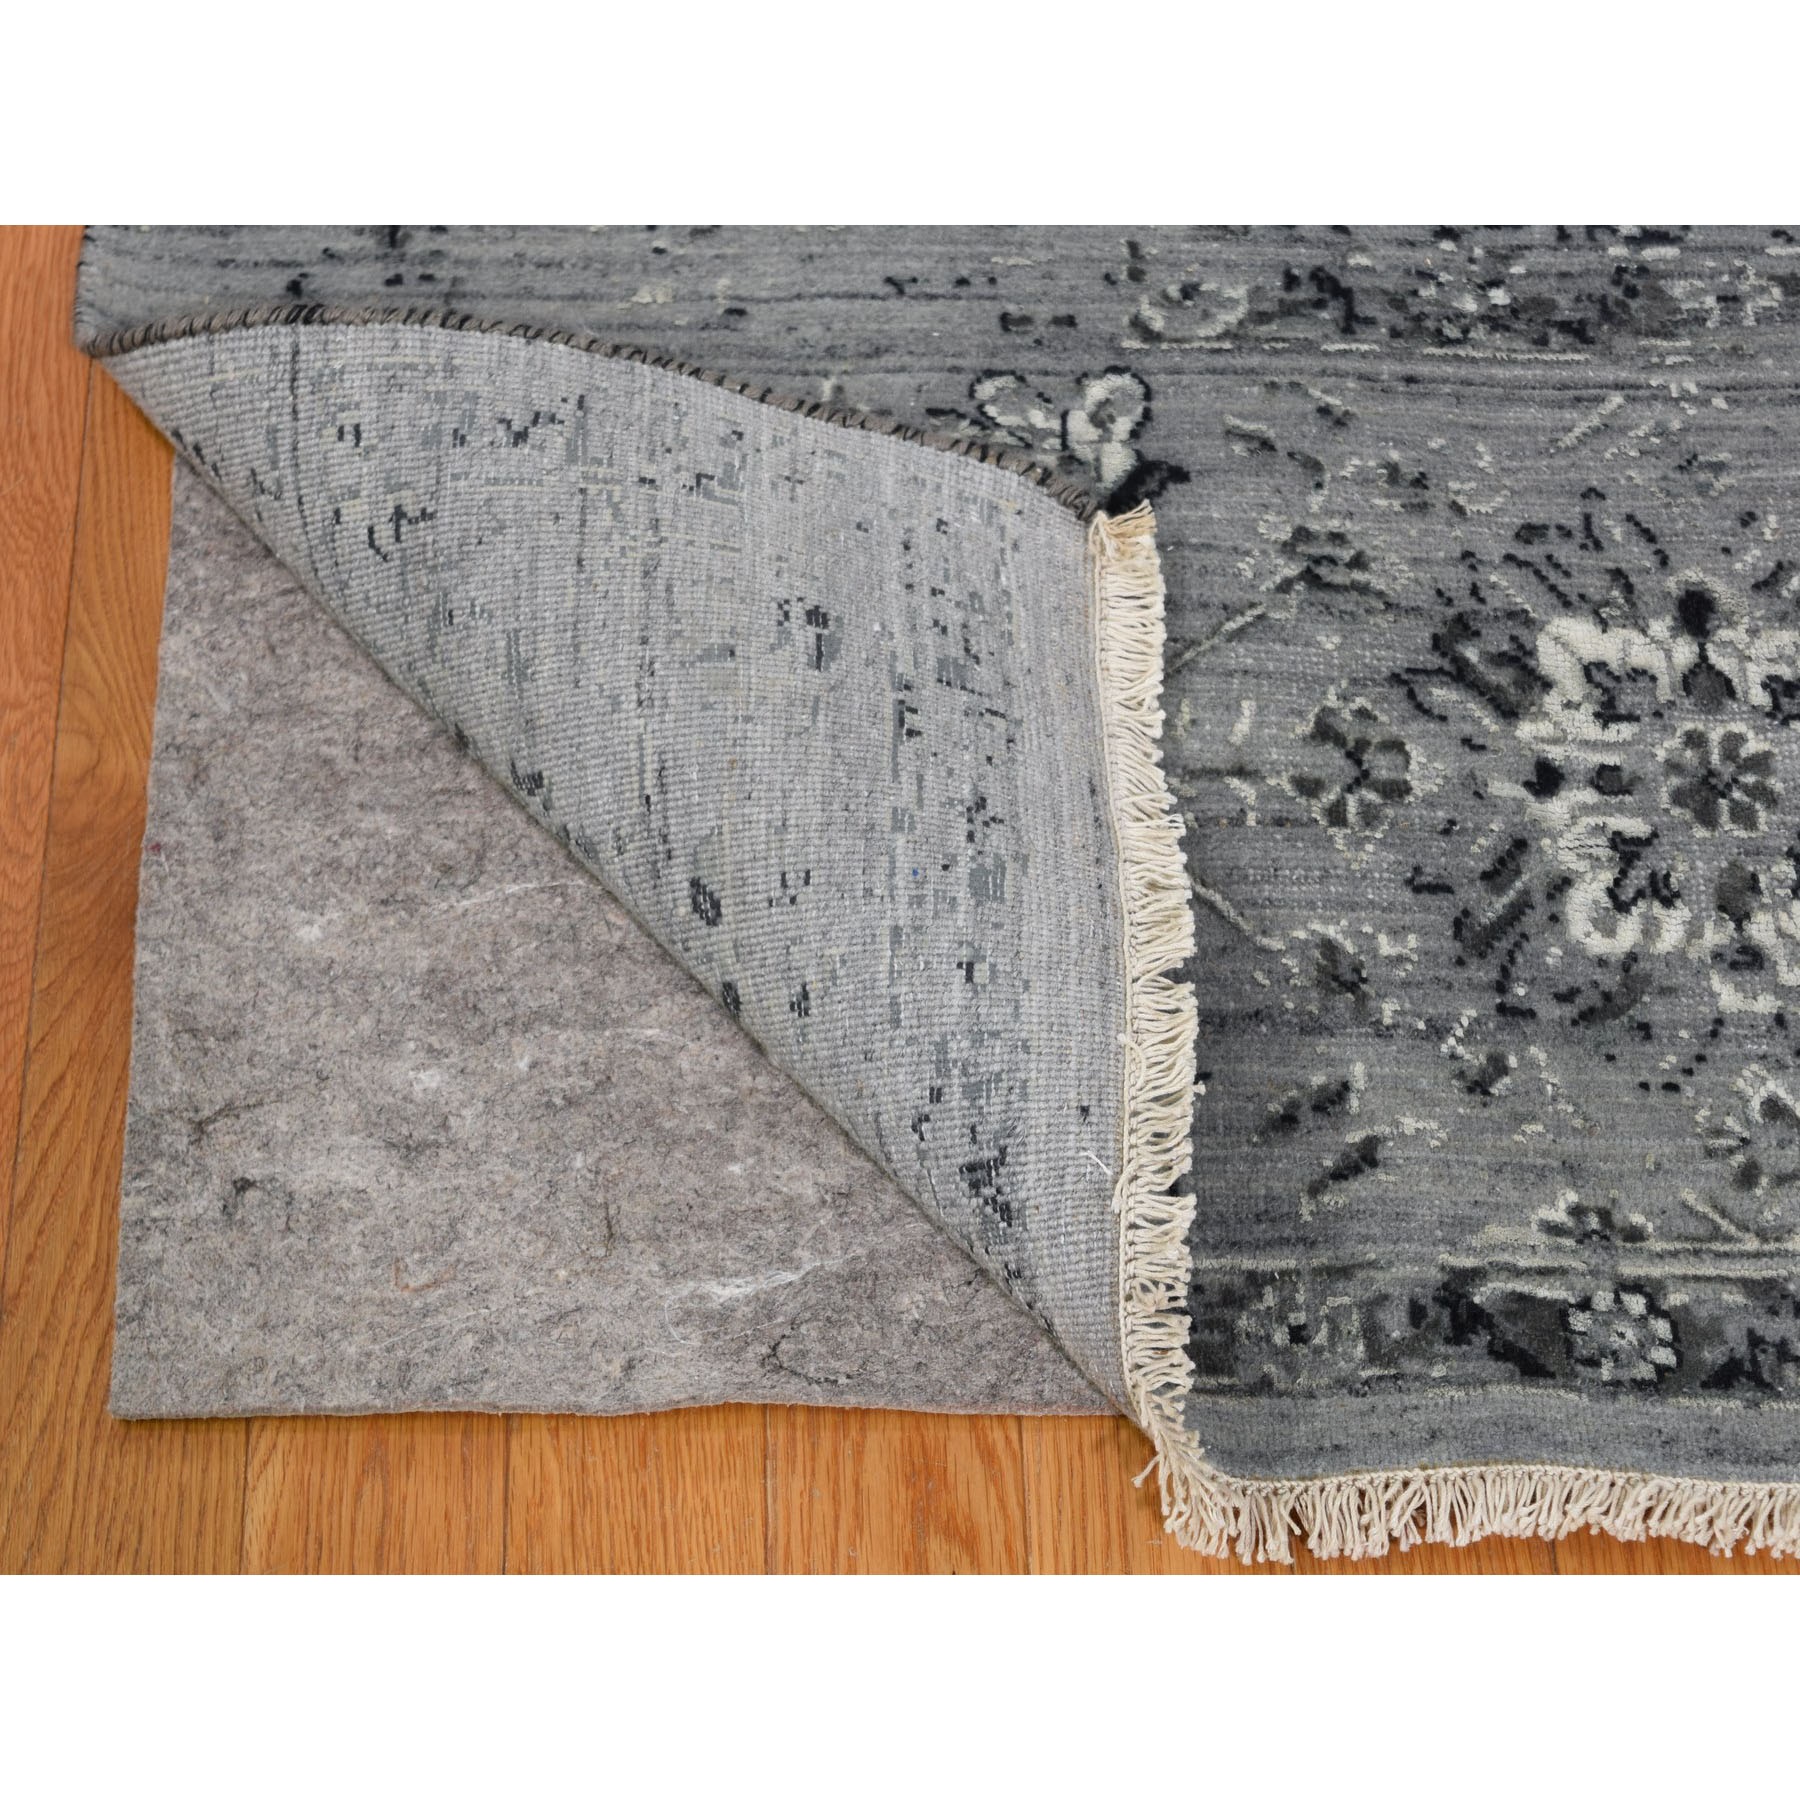 10-x10- Square Gray Broken Persian Erased Design Pure Silk With Textured Wool Hand Knotted Oriental Rug 